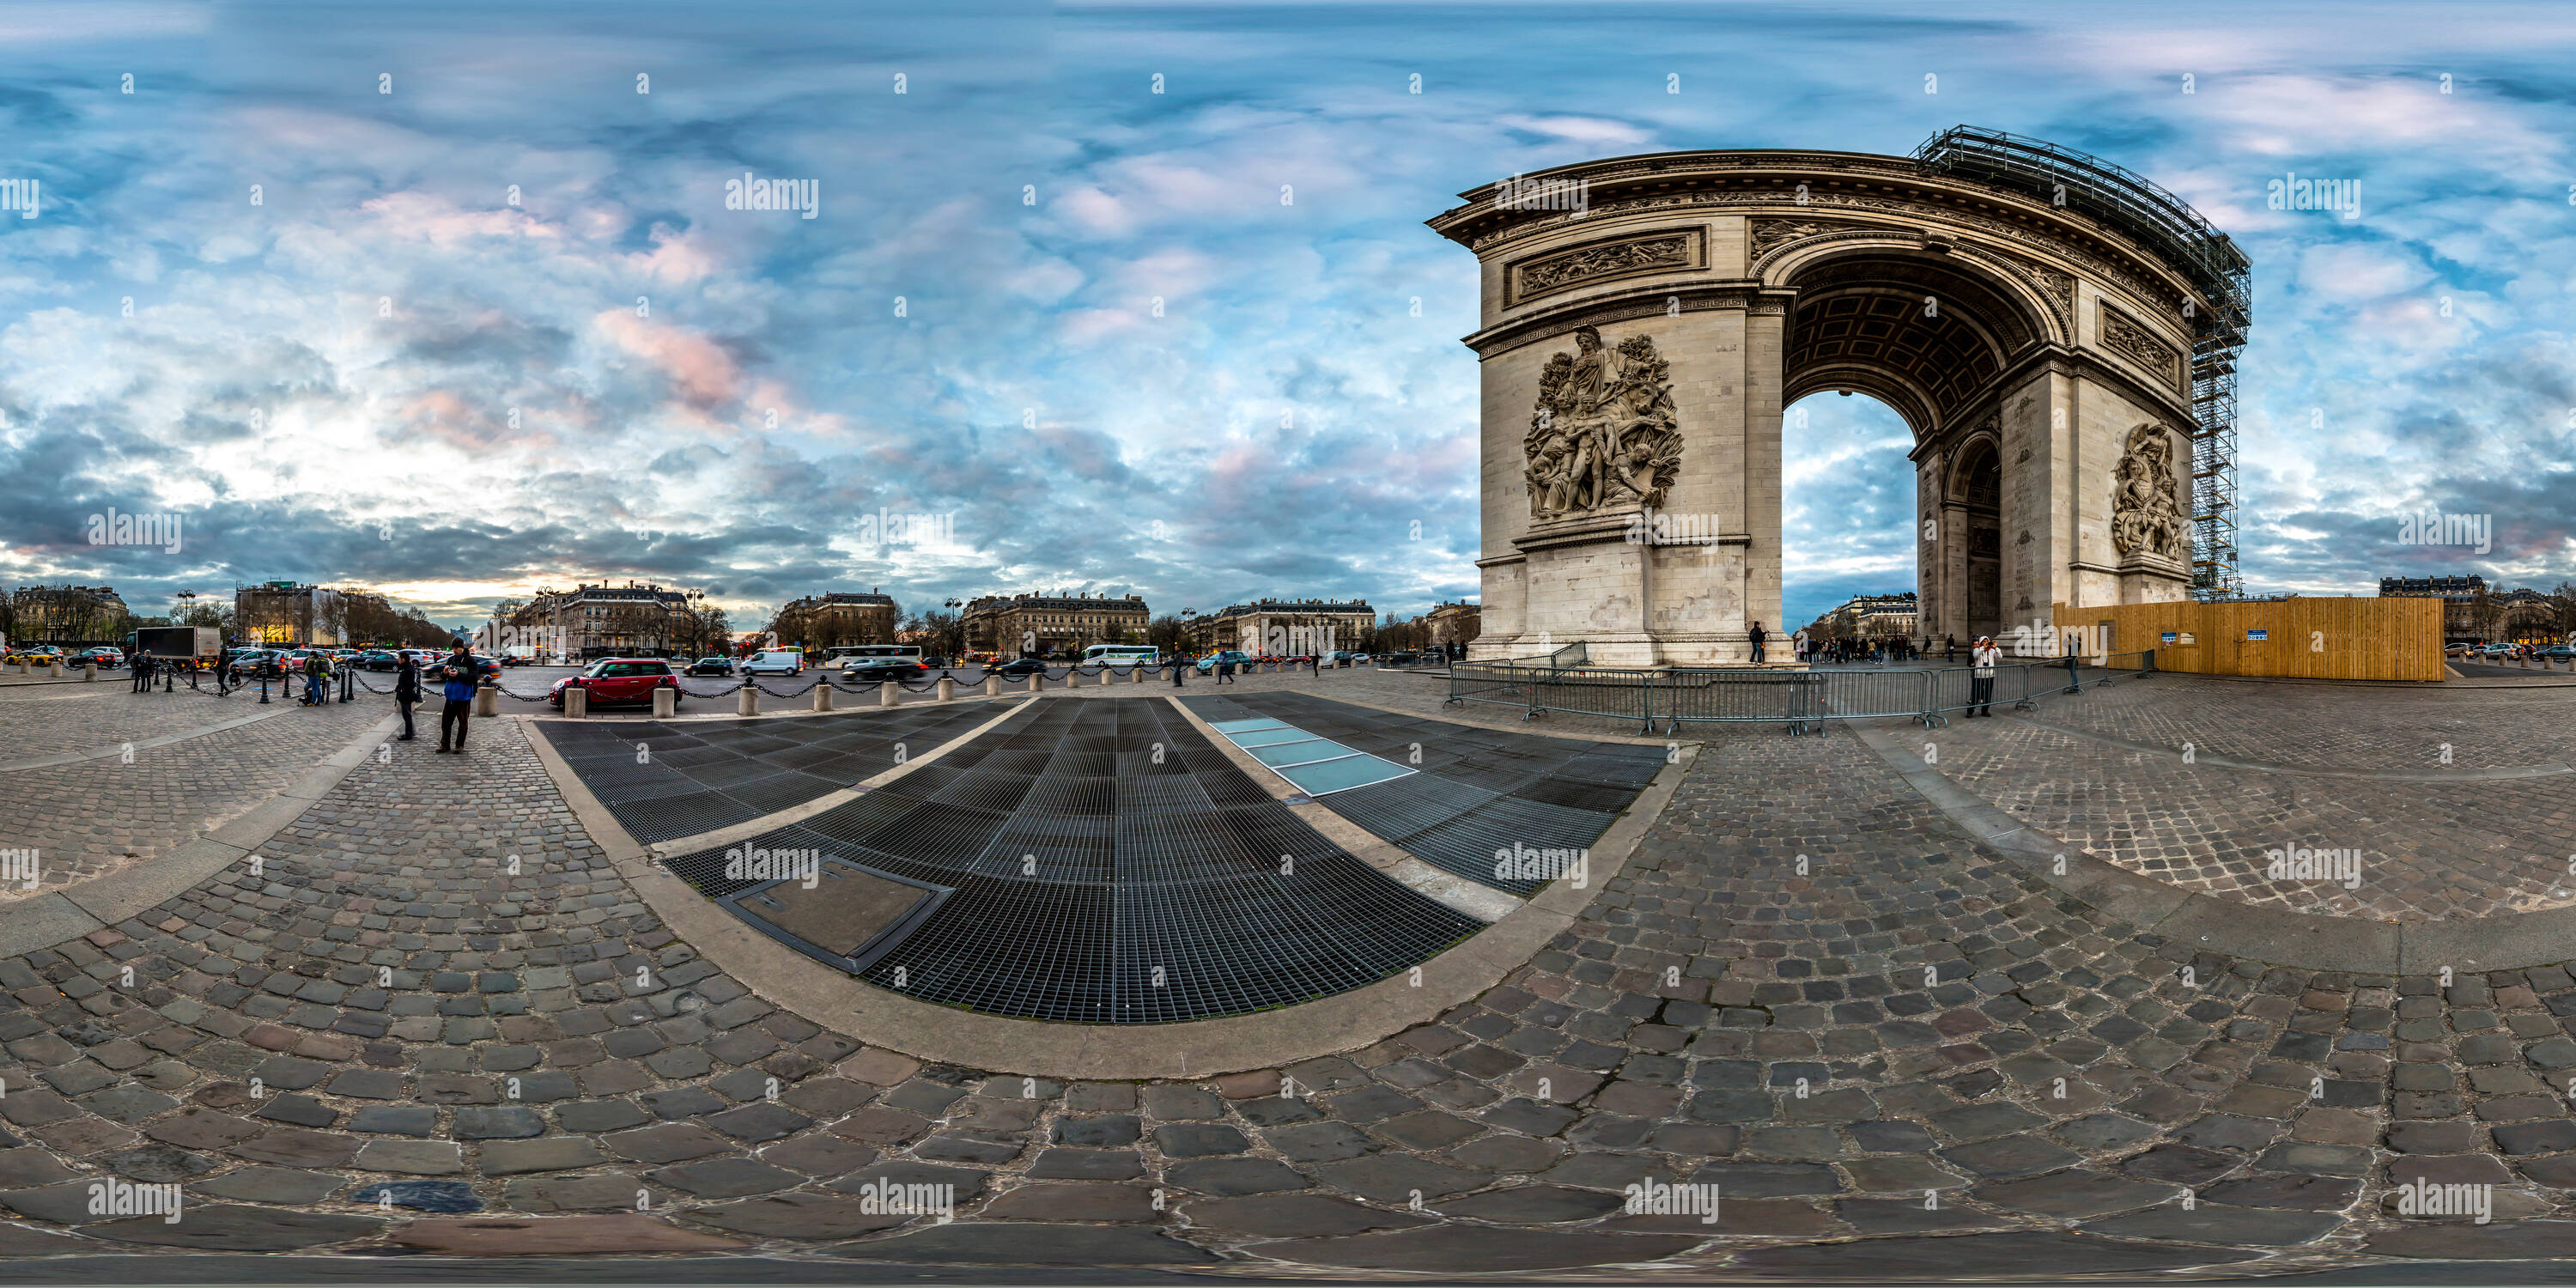 360 degree panoramic view of Arc du Triomphe